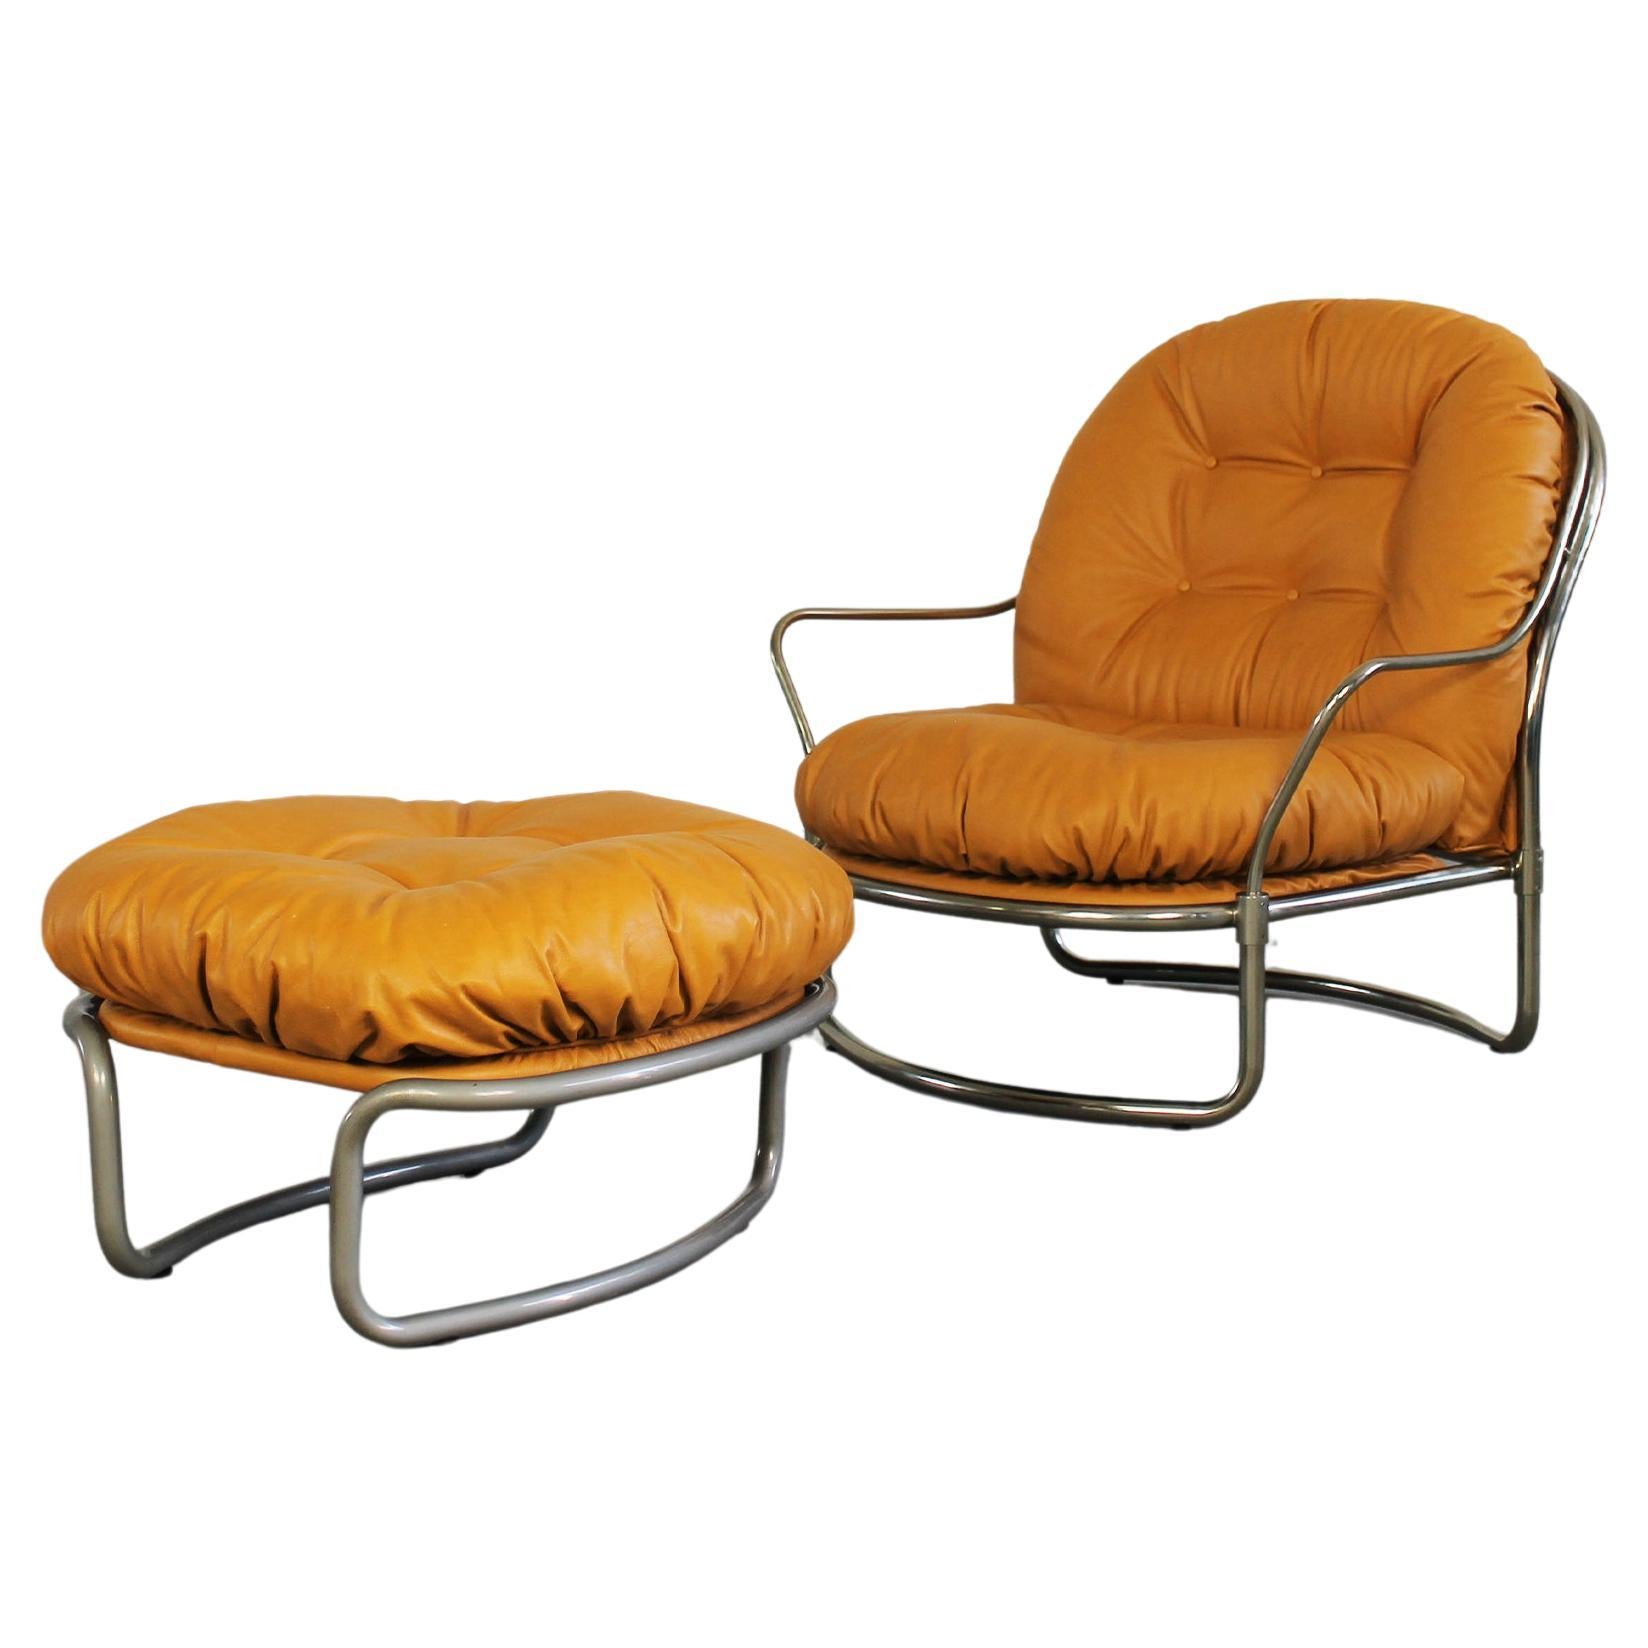 Carlo de Carli 915 Armchair with Footrest in Metal and Leather by Cinova 1970s